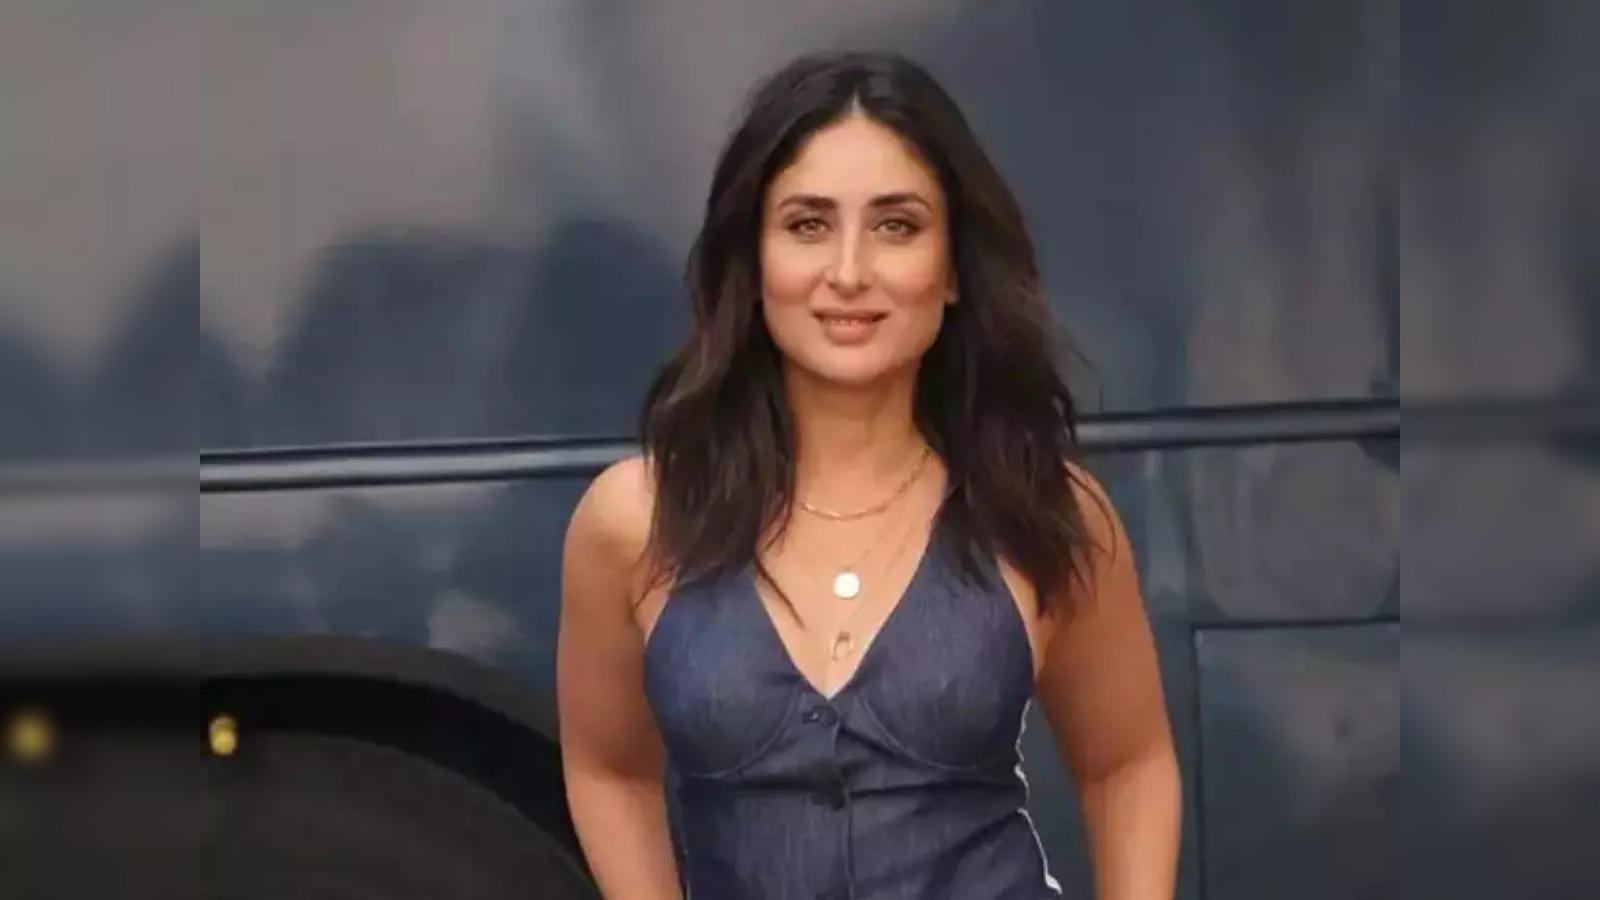 kareena: Kareena Kapoor Khan reveals she wants to lead an action franchise:  'I know I will be good at it!' - The Economic Times